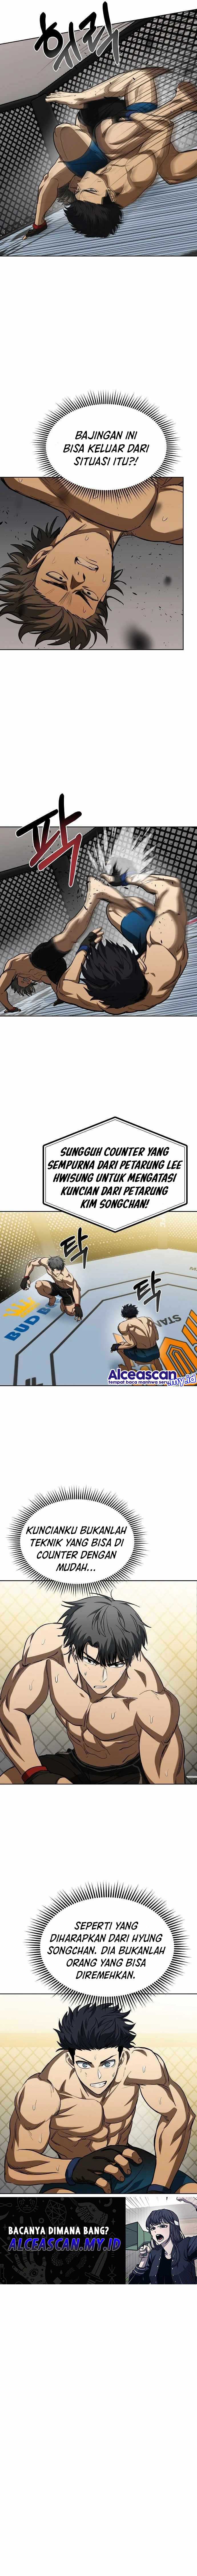 King MMA Chapter 78